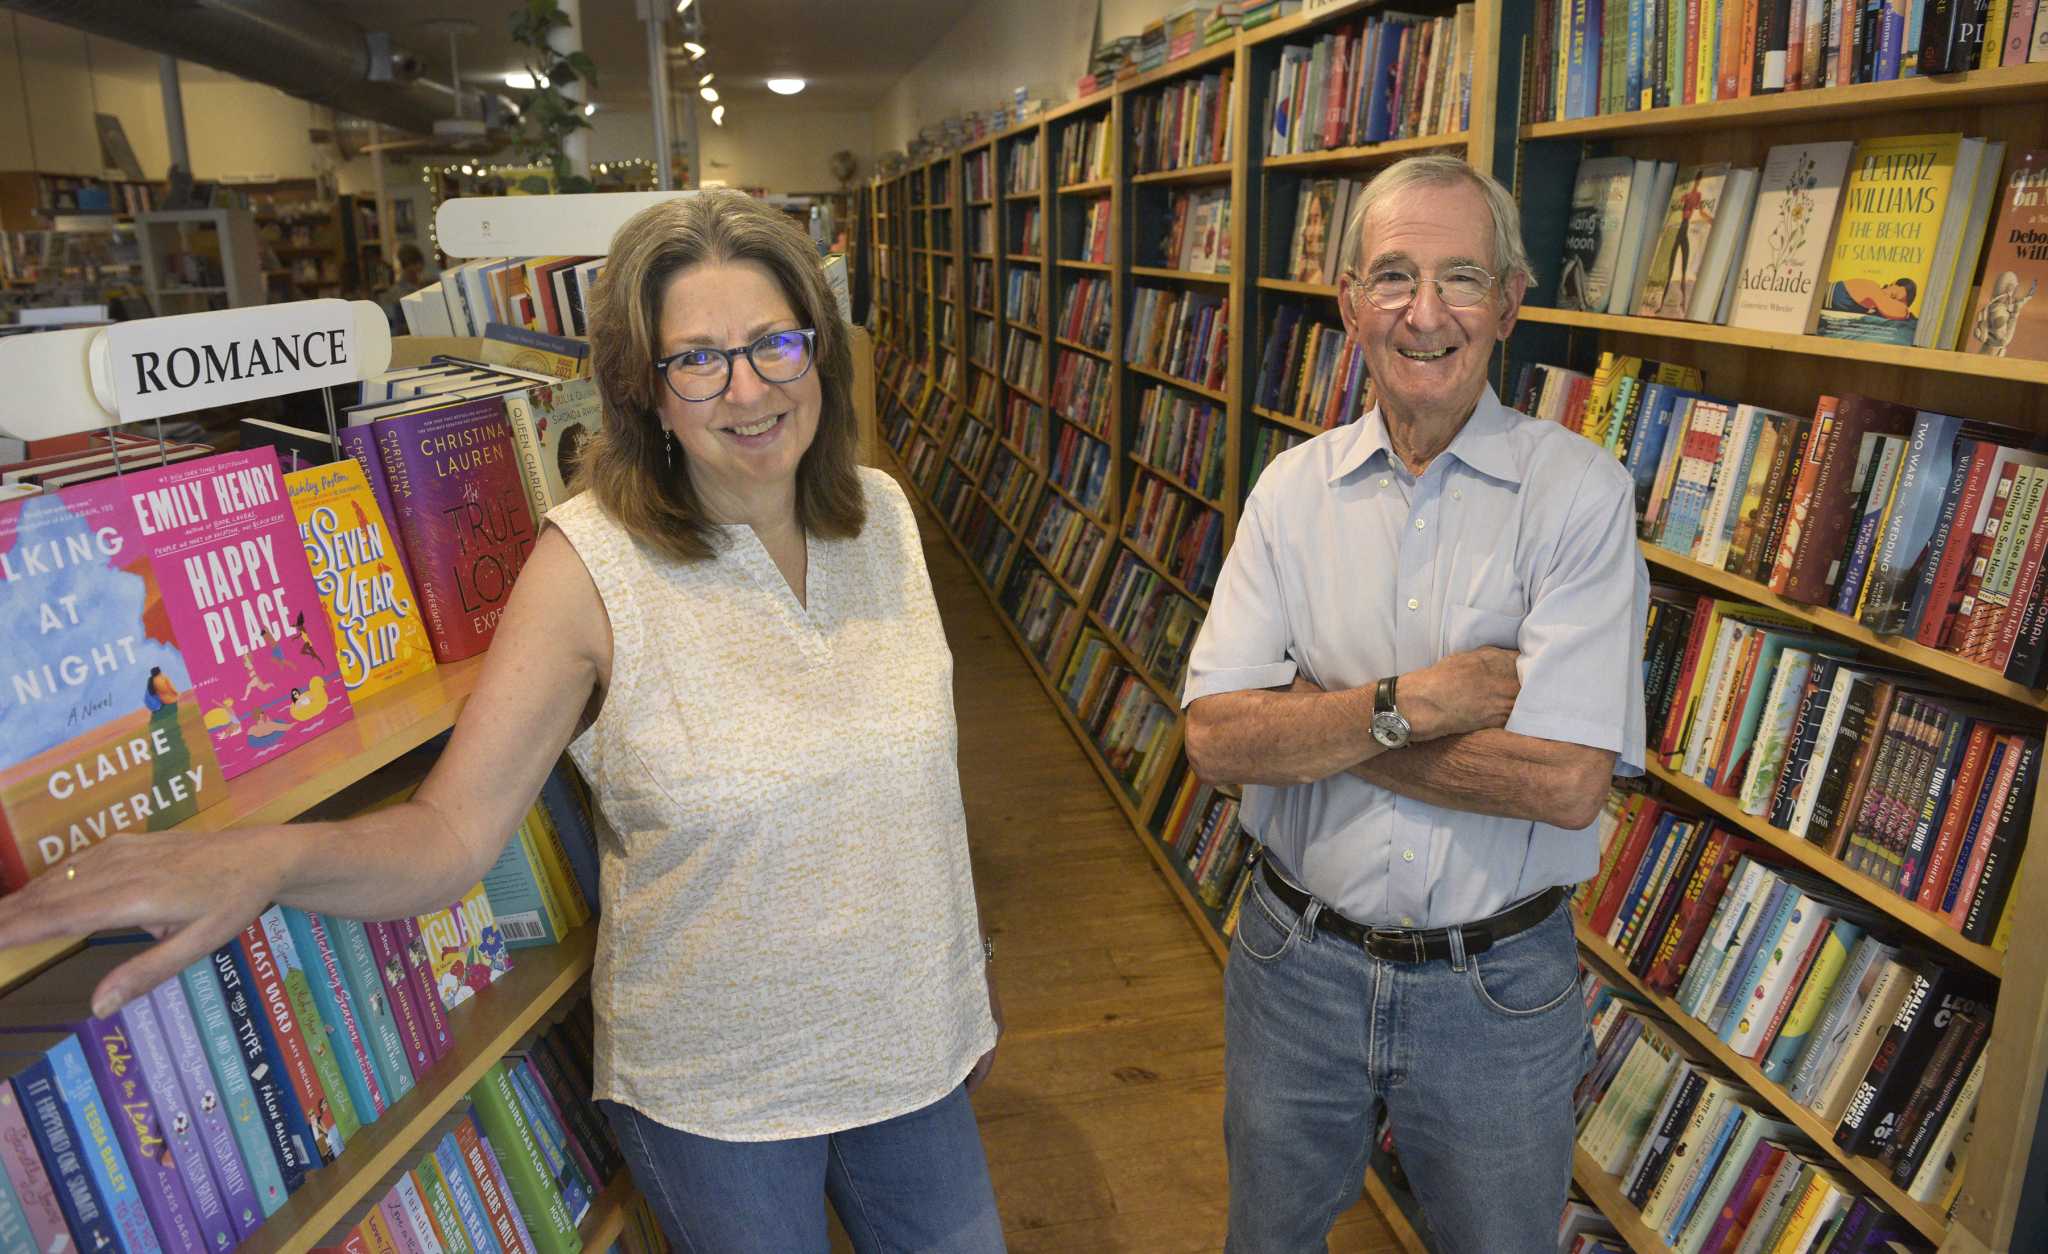 Indie bookstores find innovative ways to thrive with online, pop